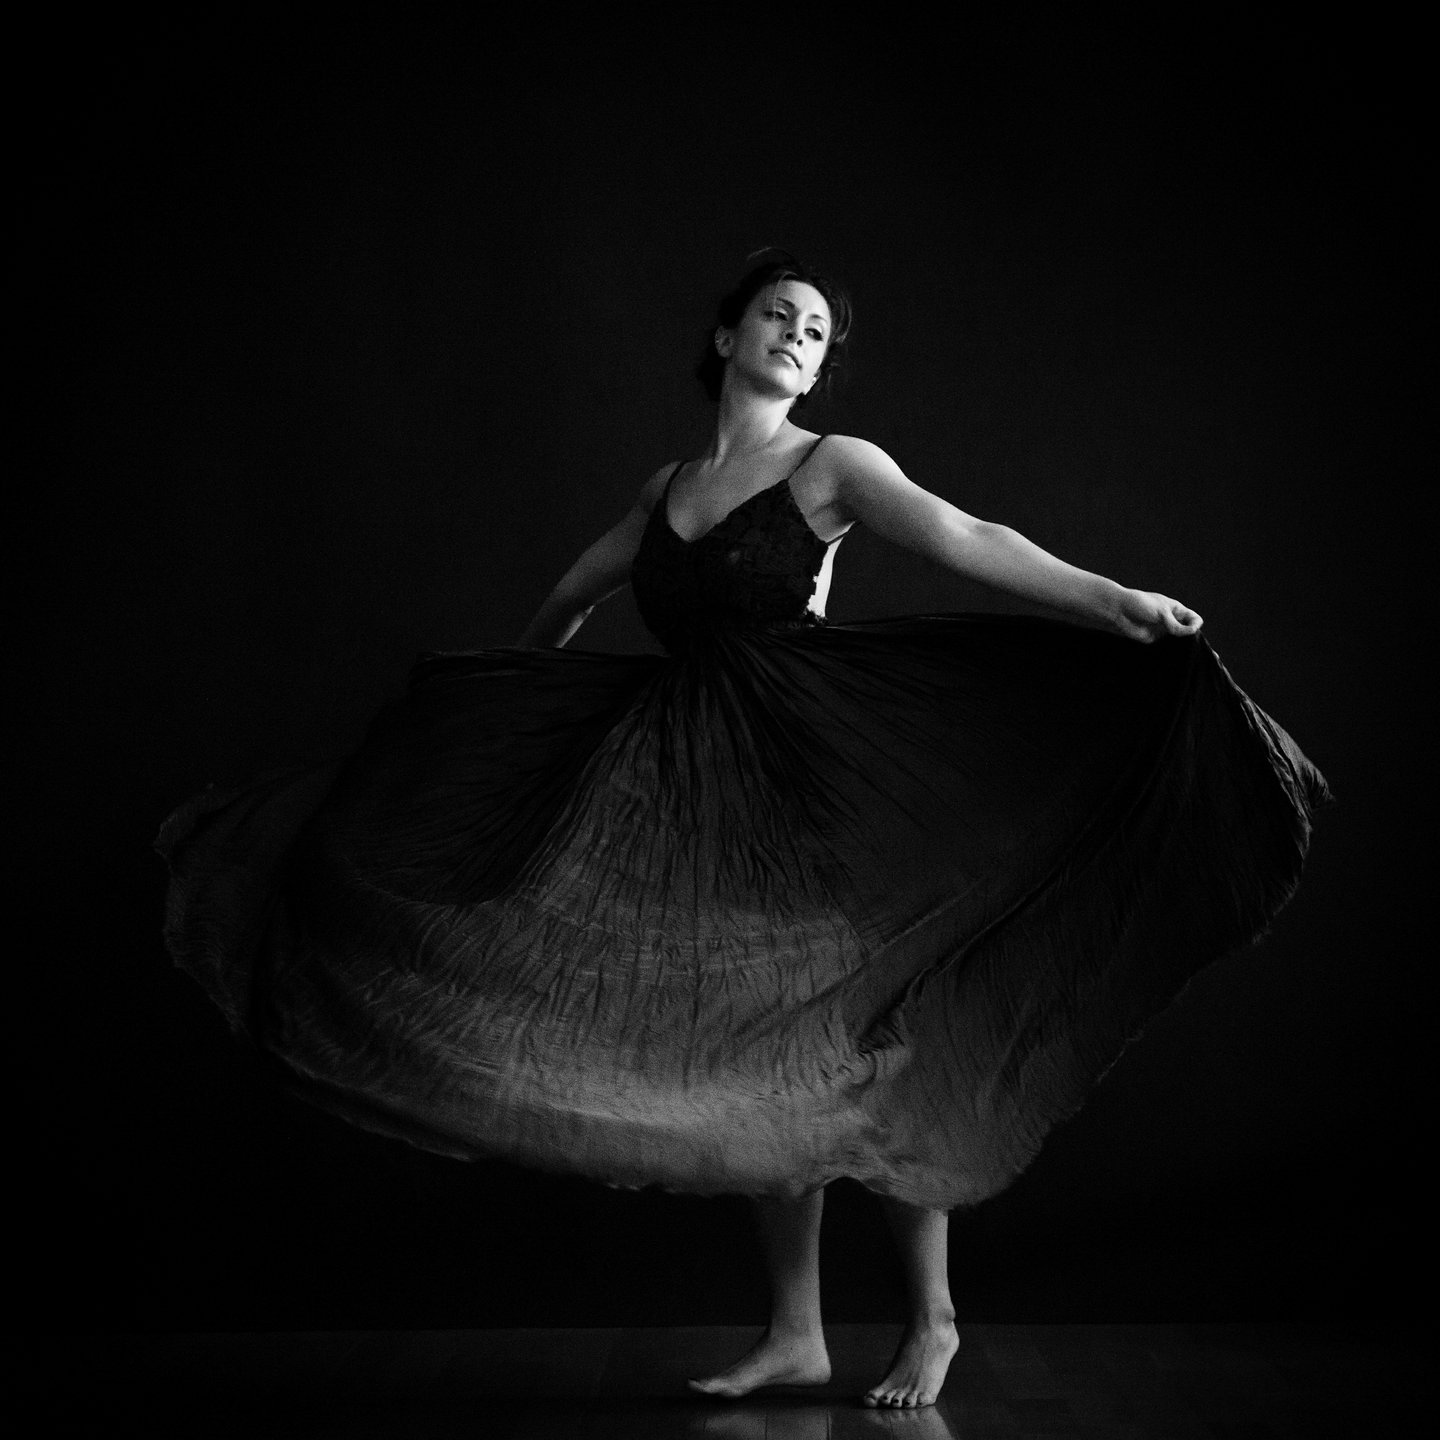 Los Angeles Dance Portrait Photo - Stephanie Abrams - by Tommy Xing Photography 19.jpg